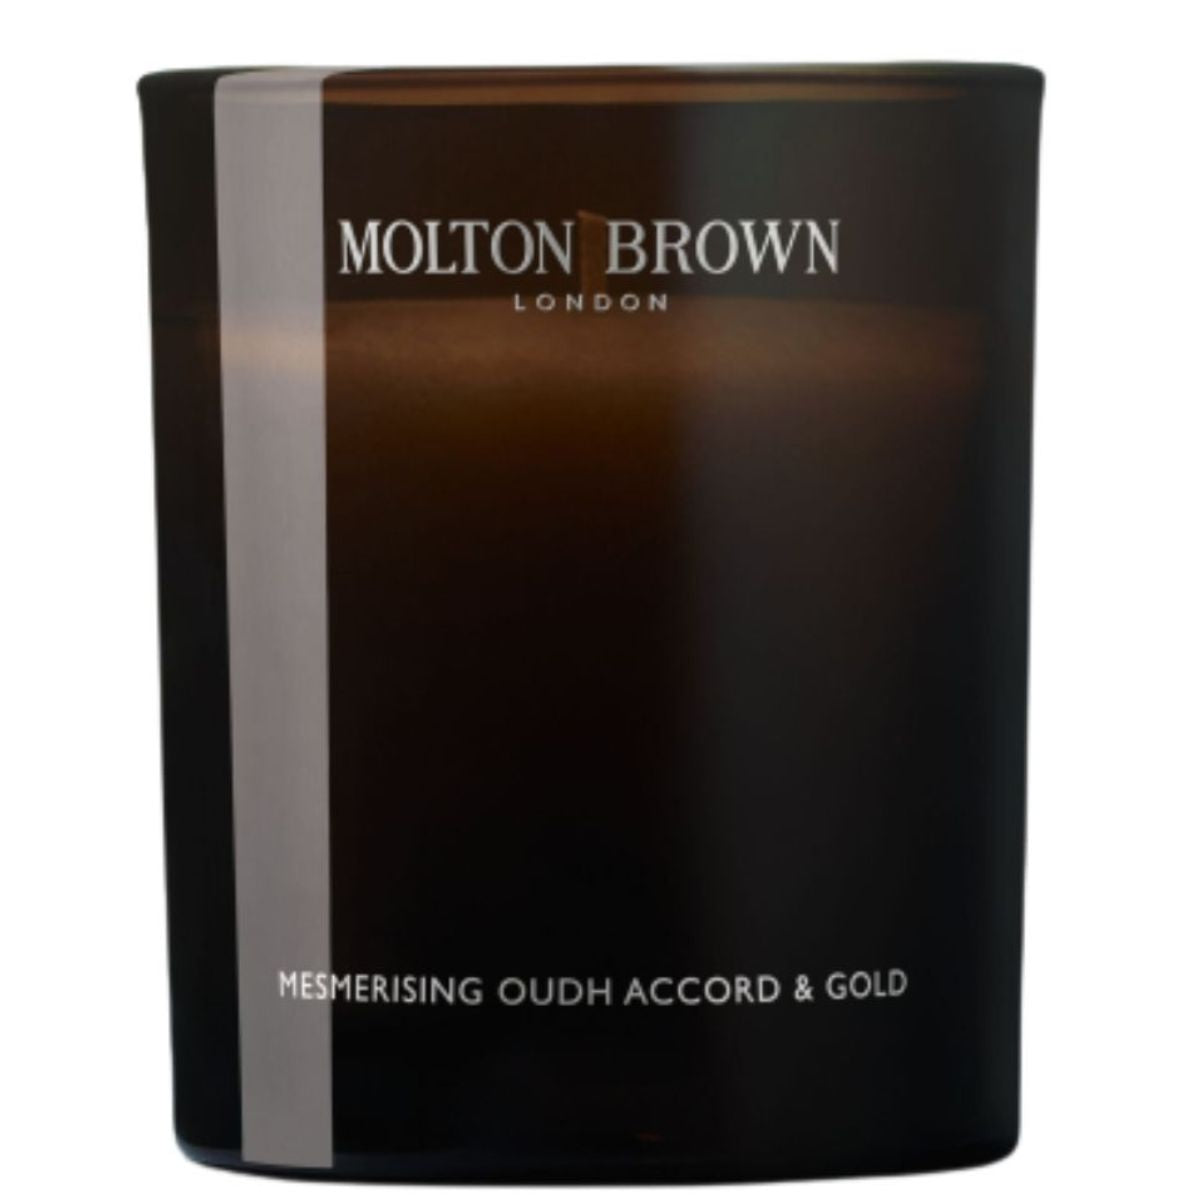 Molton Brown Mesmerising Oudh Accord & Gold Signature Scented Single Wick Candle